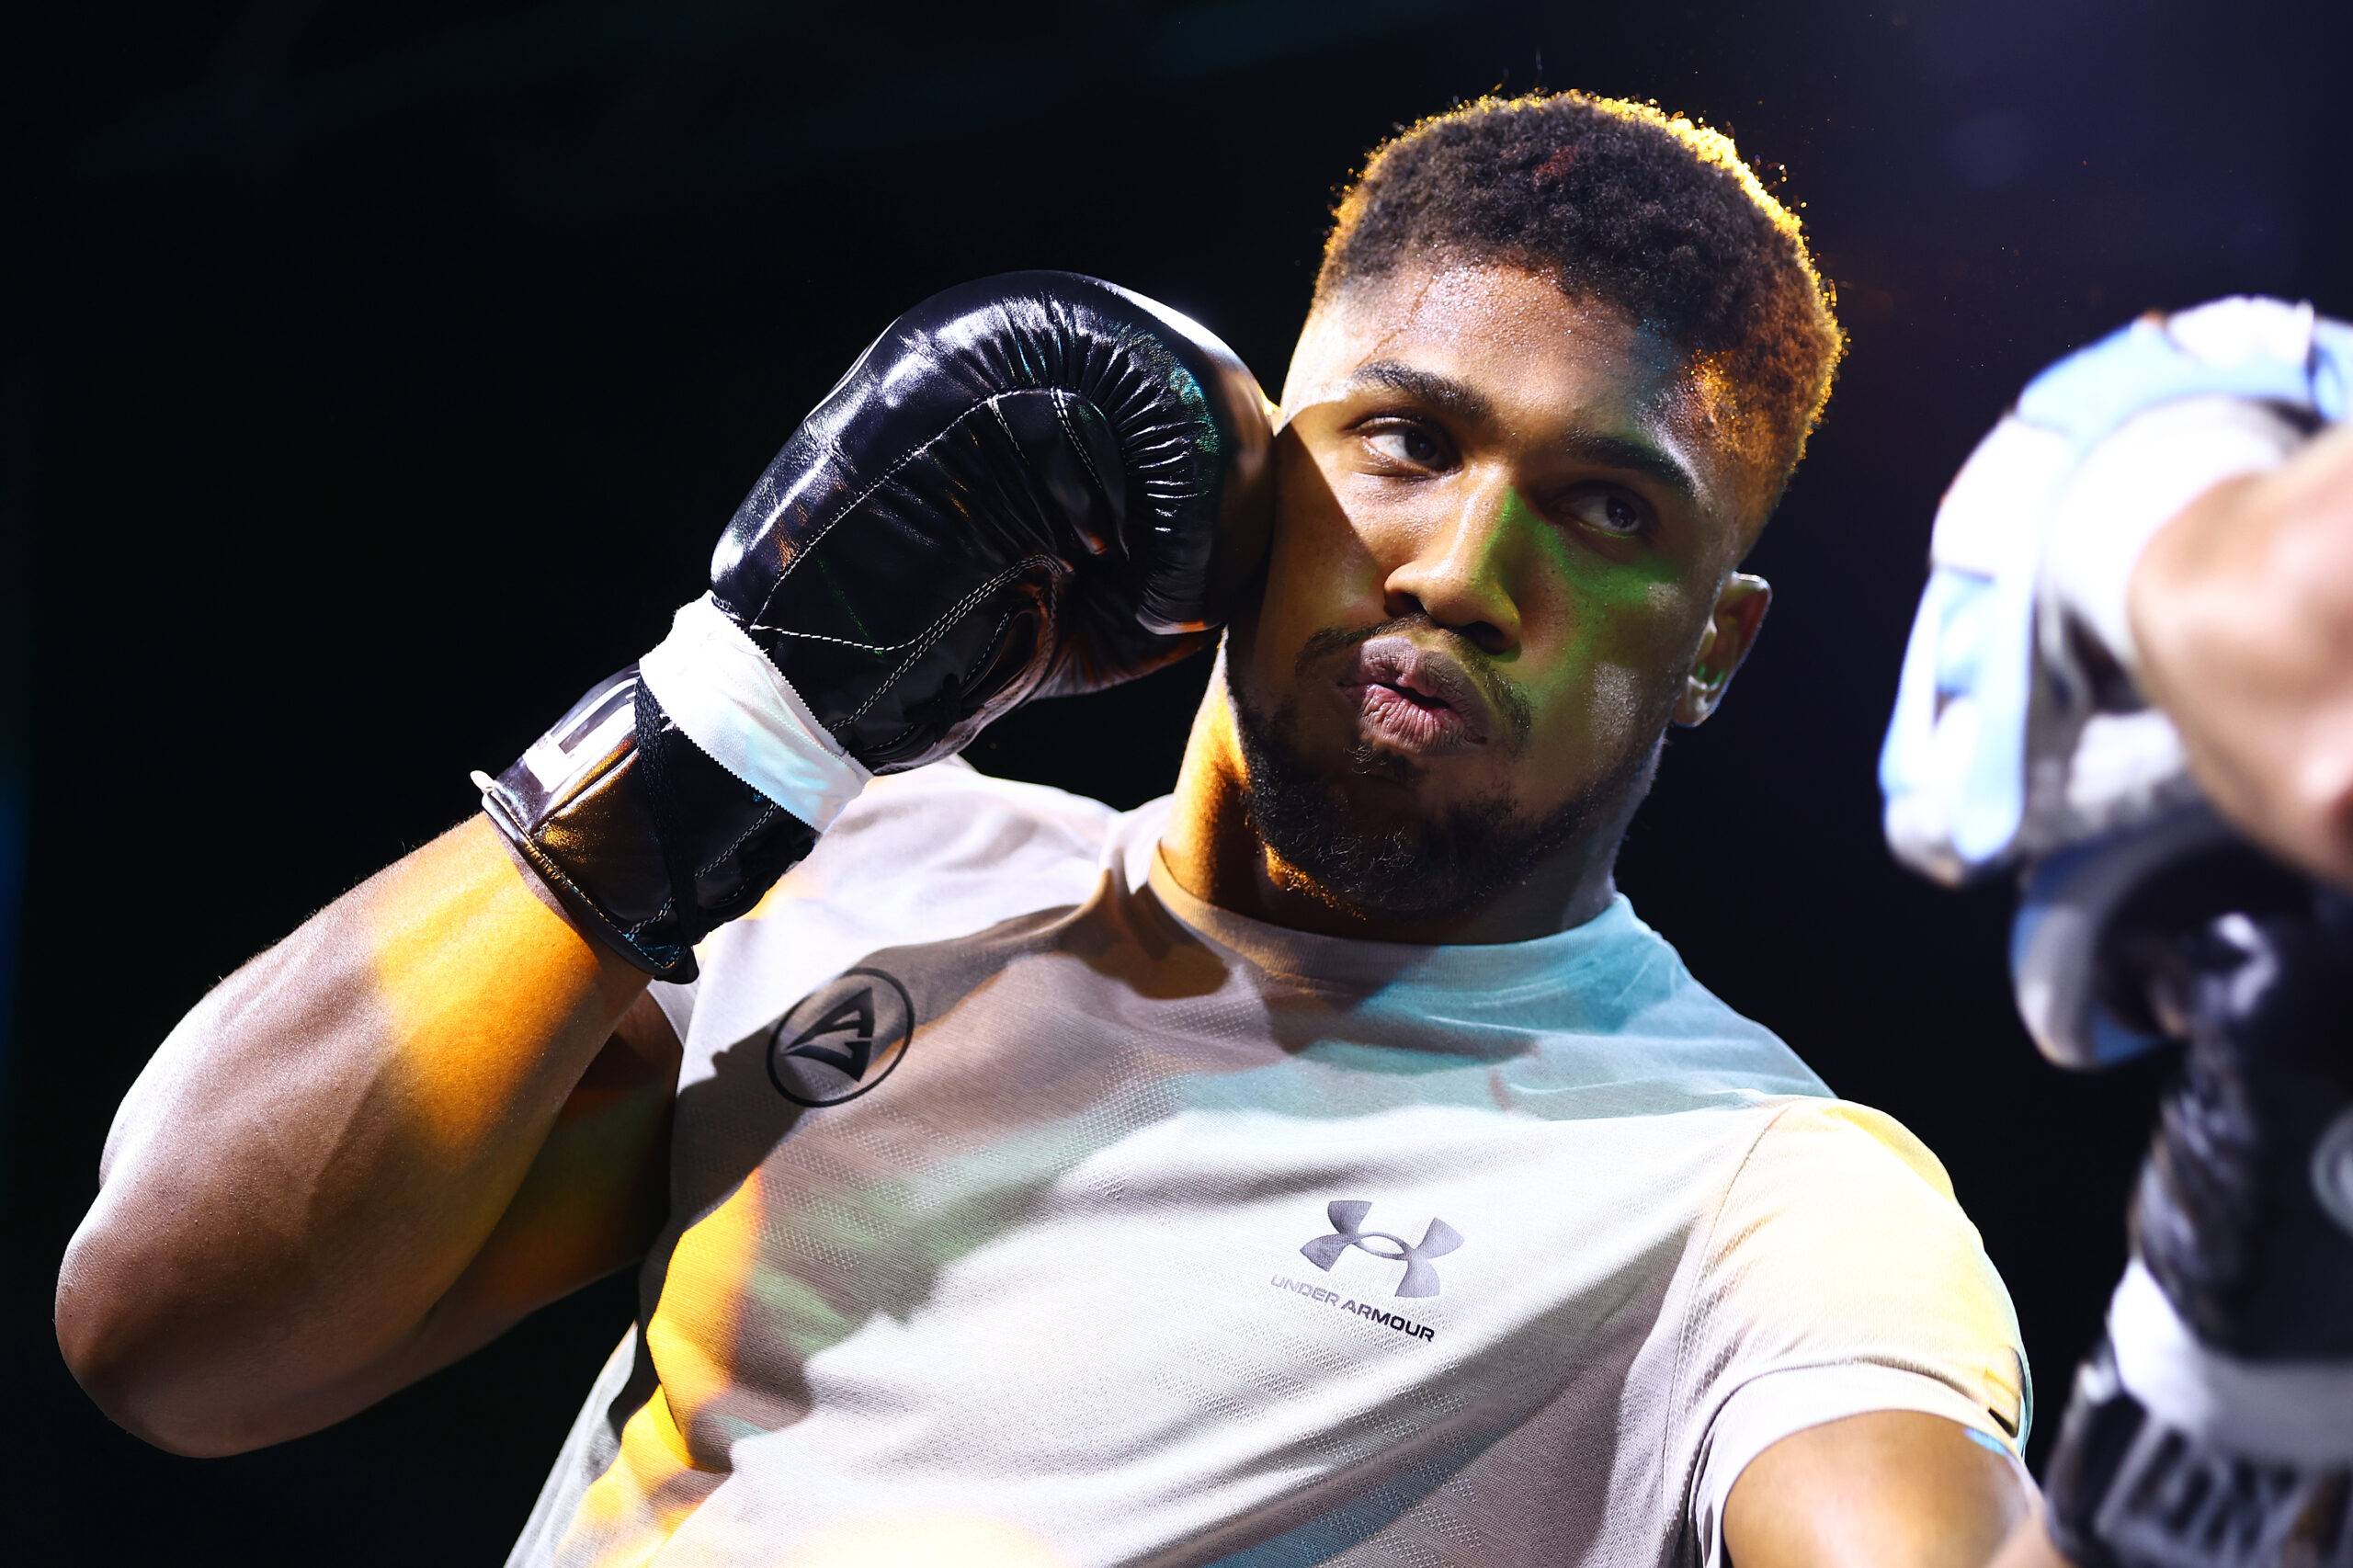 Anthony Joshua has vowed to KO Oleksandr Usyk in their rematch